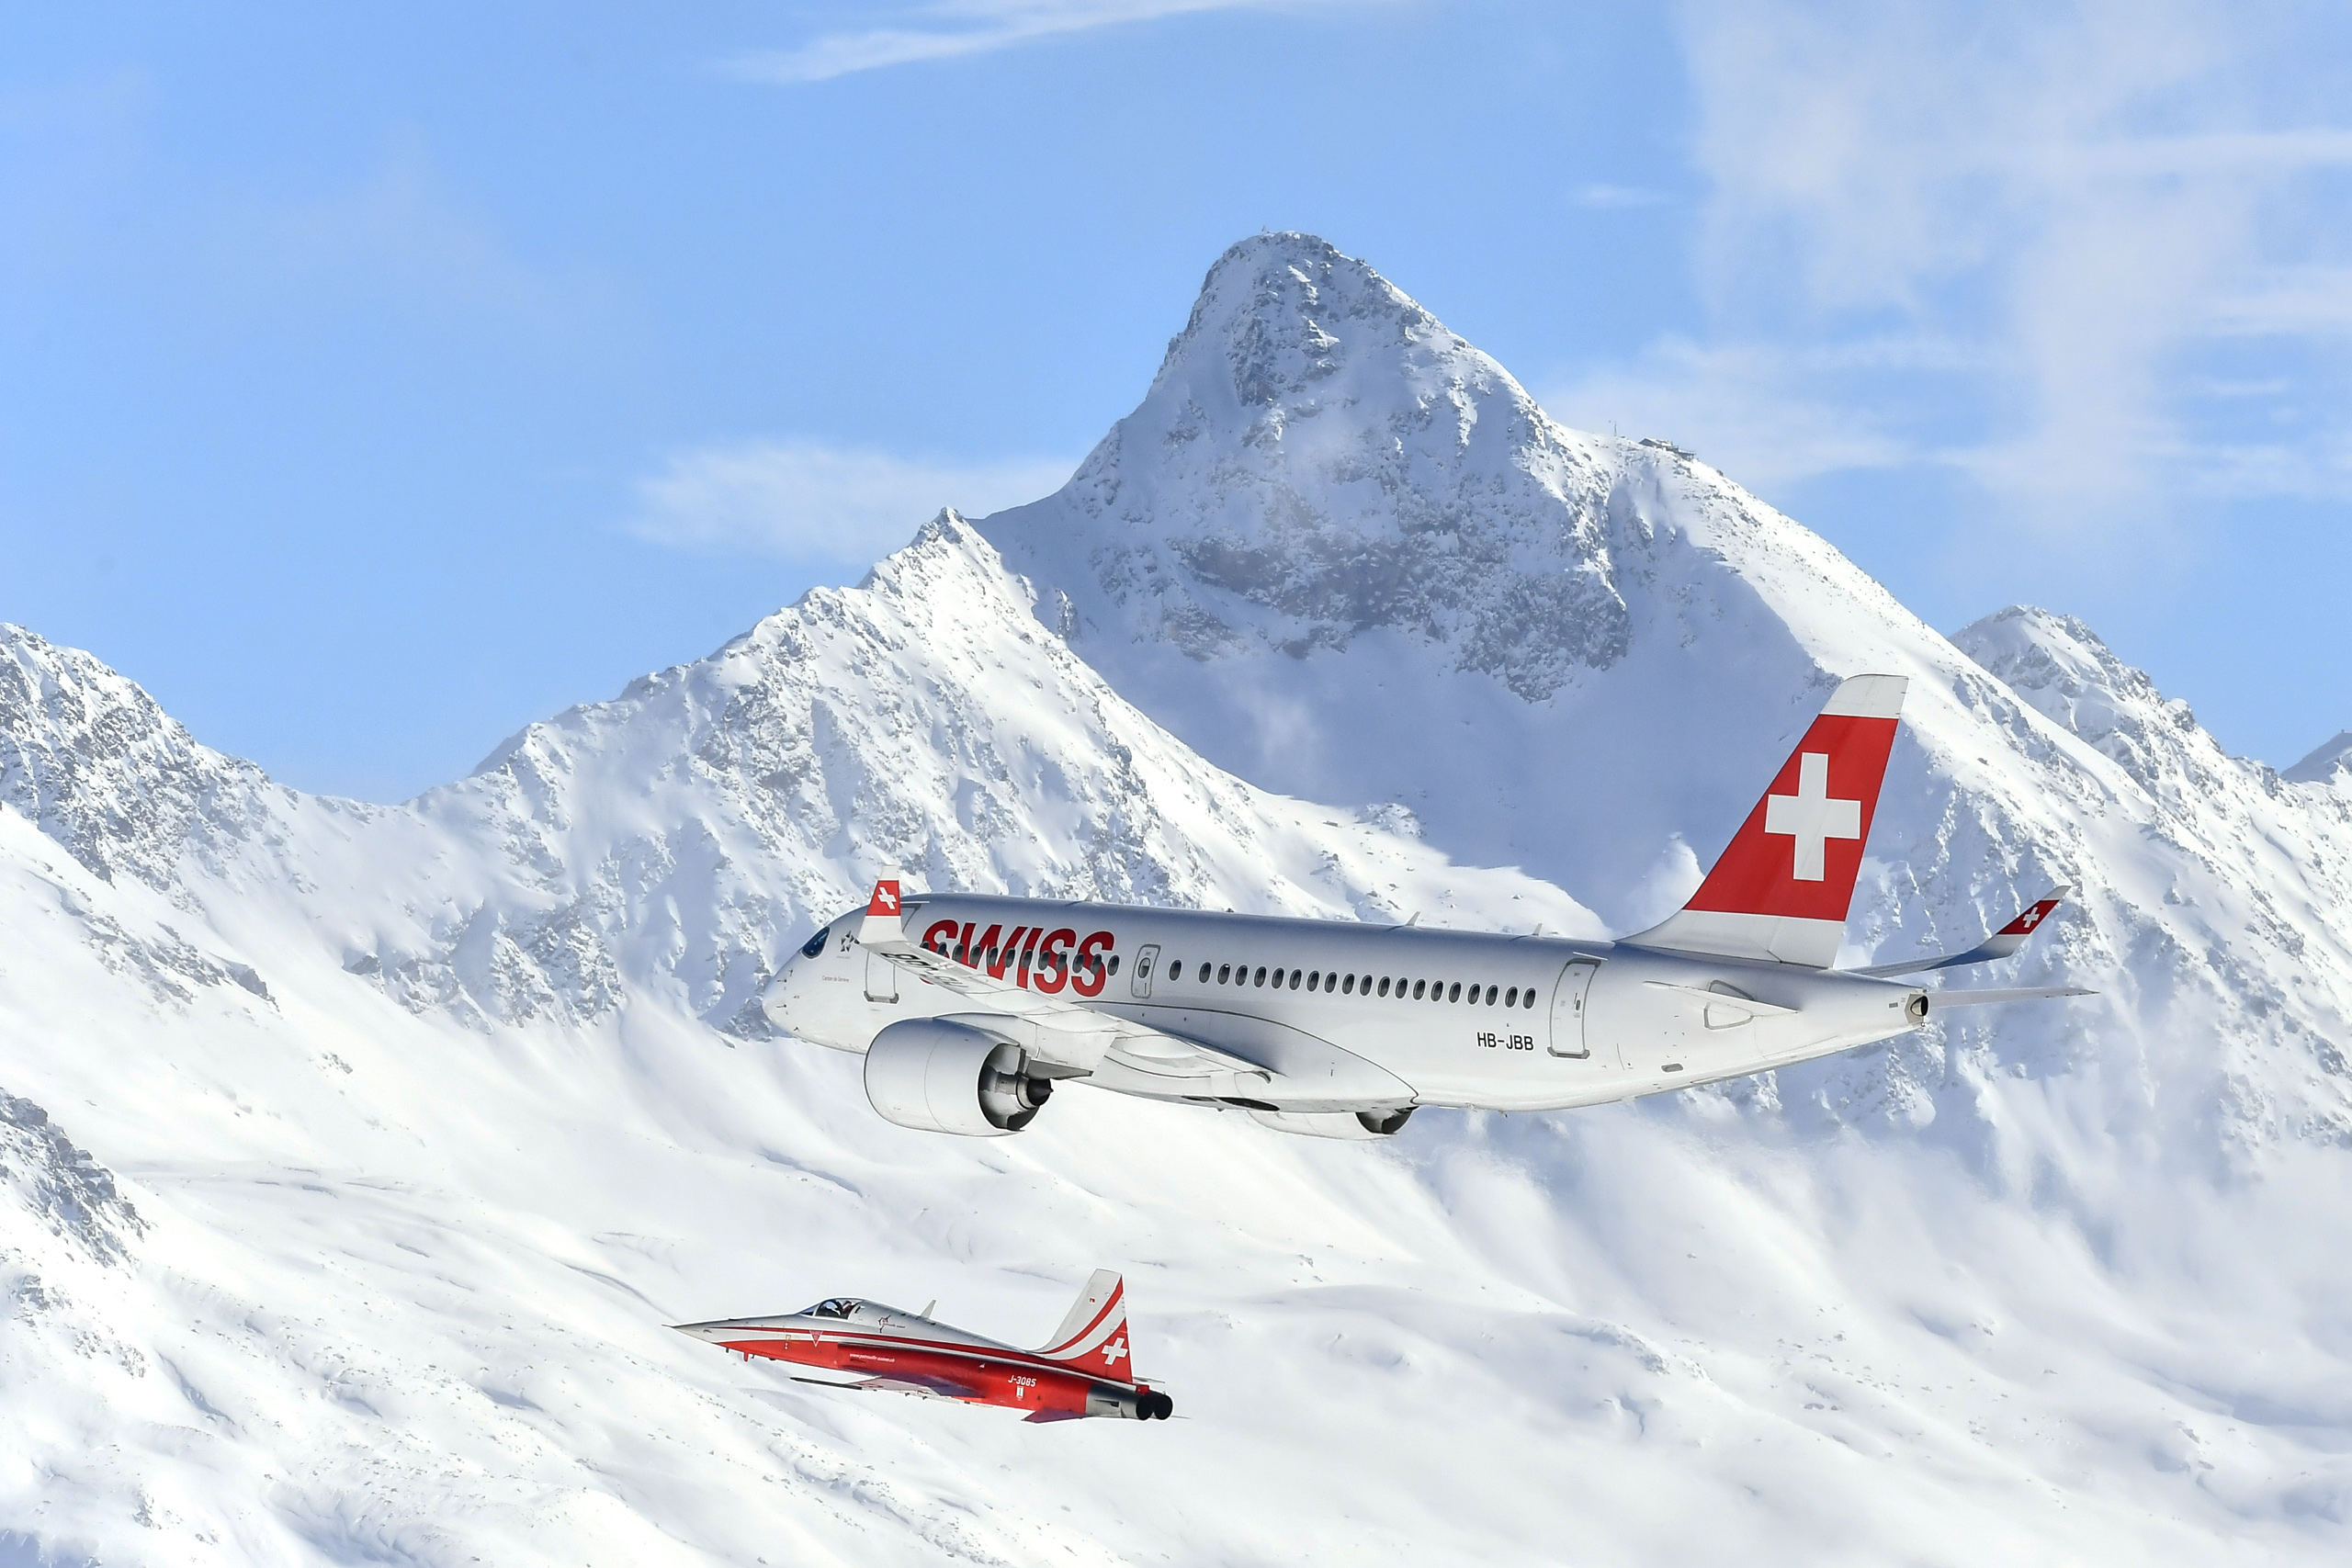 ST MORITZ - February 7, 2017: The Swiss Air's new Bombardier C Series and the Swiss Air Force’s air display team Patrouille Suisse put on a pre-race airshow at the FIS Alpine Ski World Championships. 20170211_SLB_5740